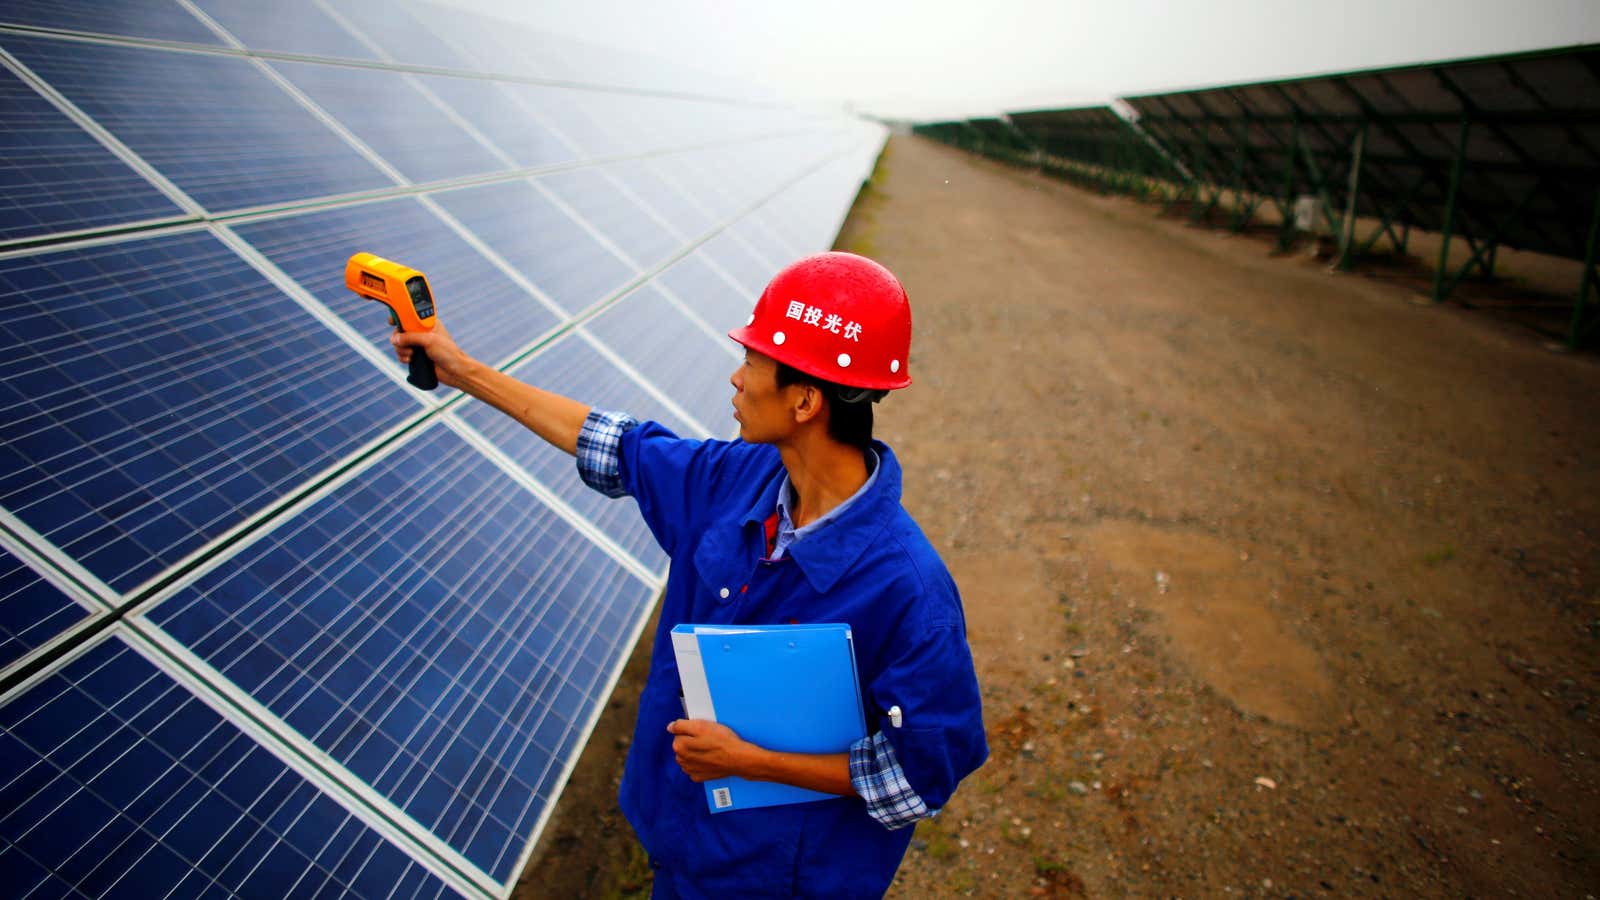 In a global carbon market, solar farms in one country can generate credits that can be bought by another.